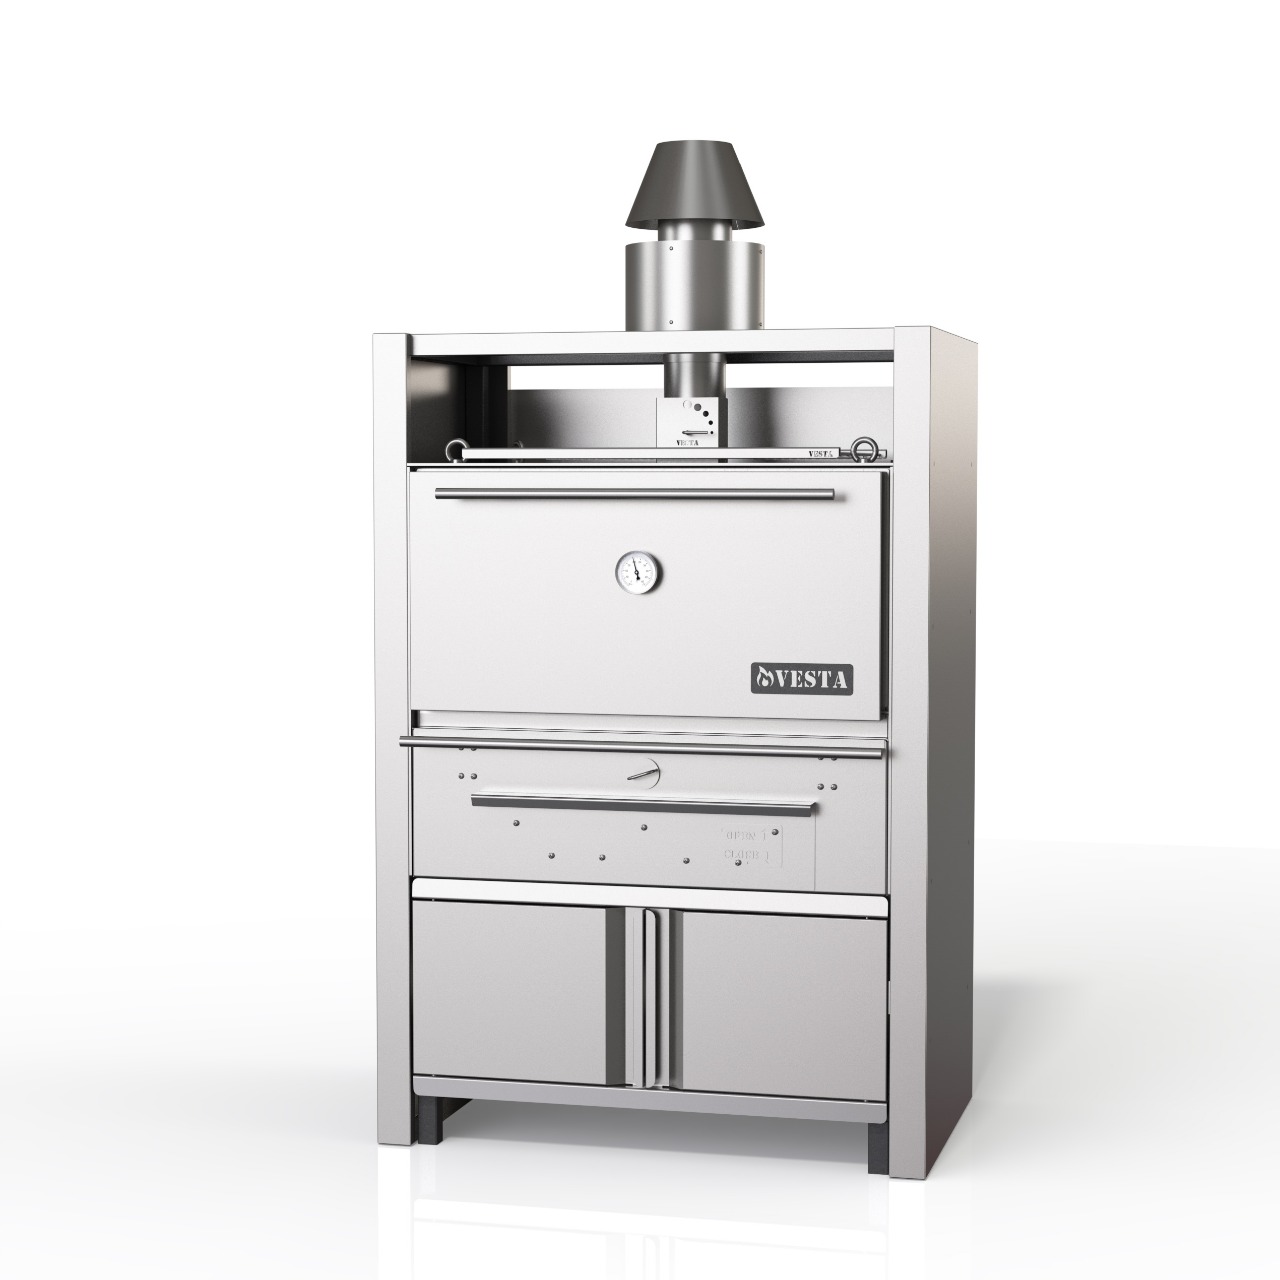 VESTA 45 SD closed charcoal grill with stand and dry spark arrestor